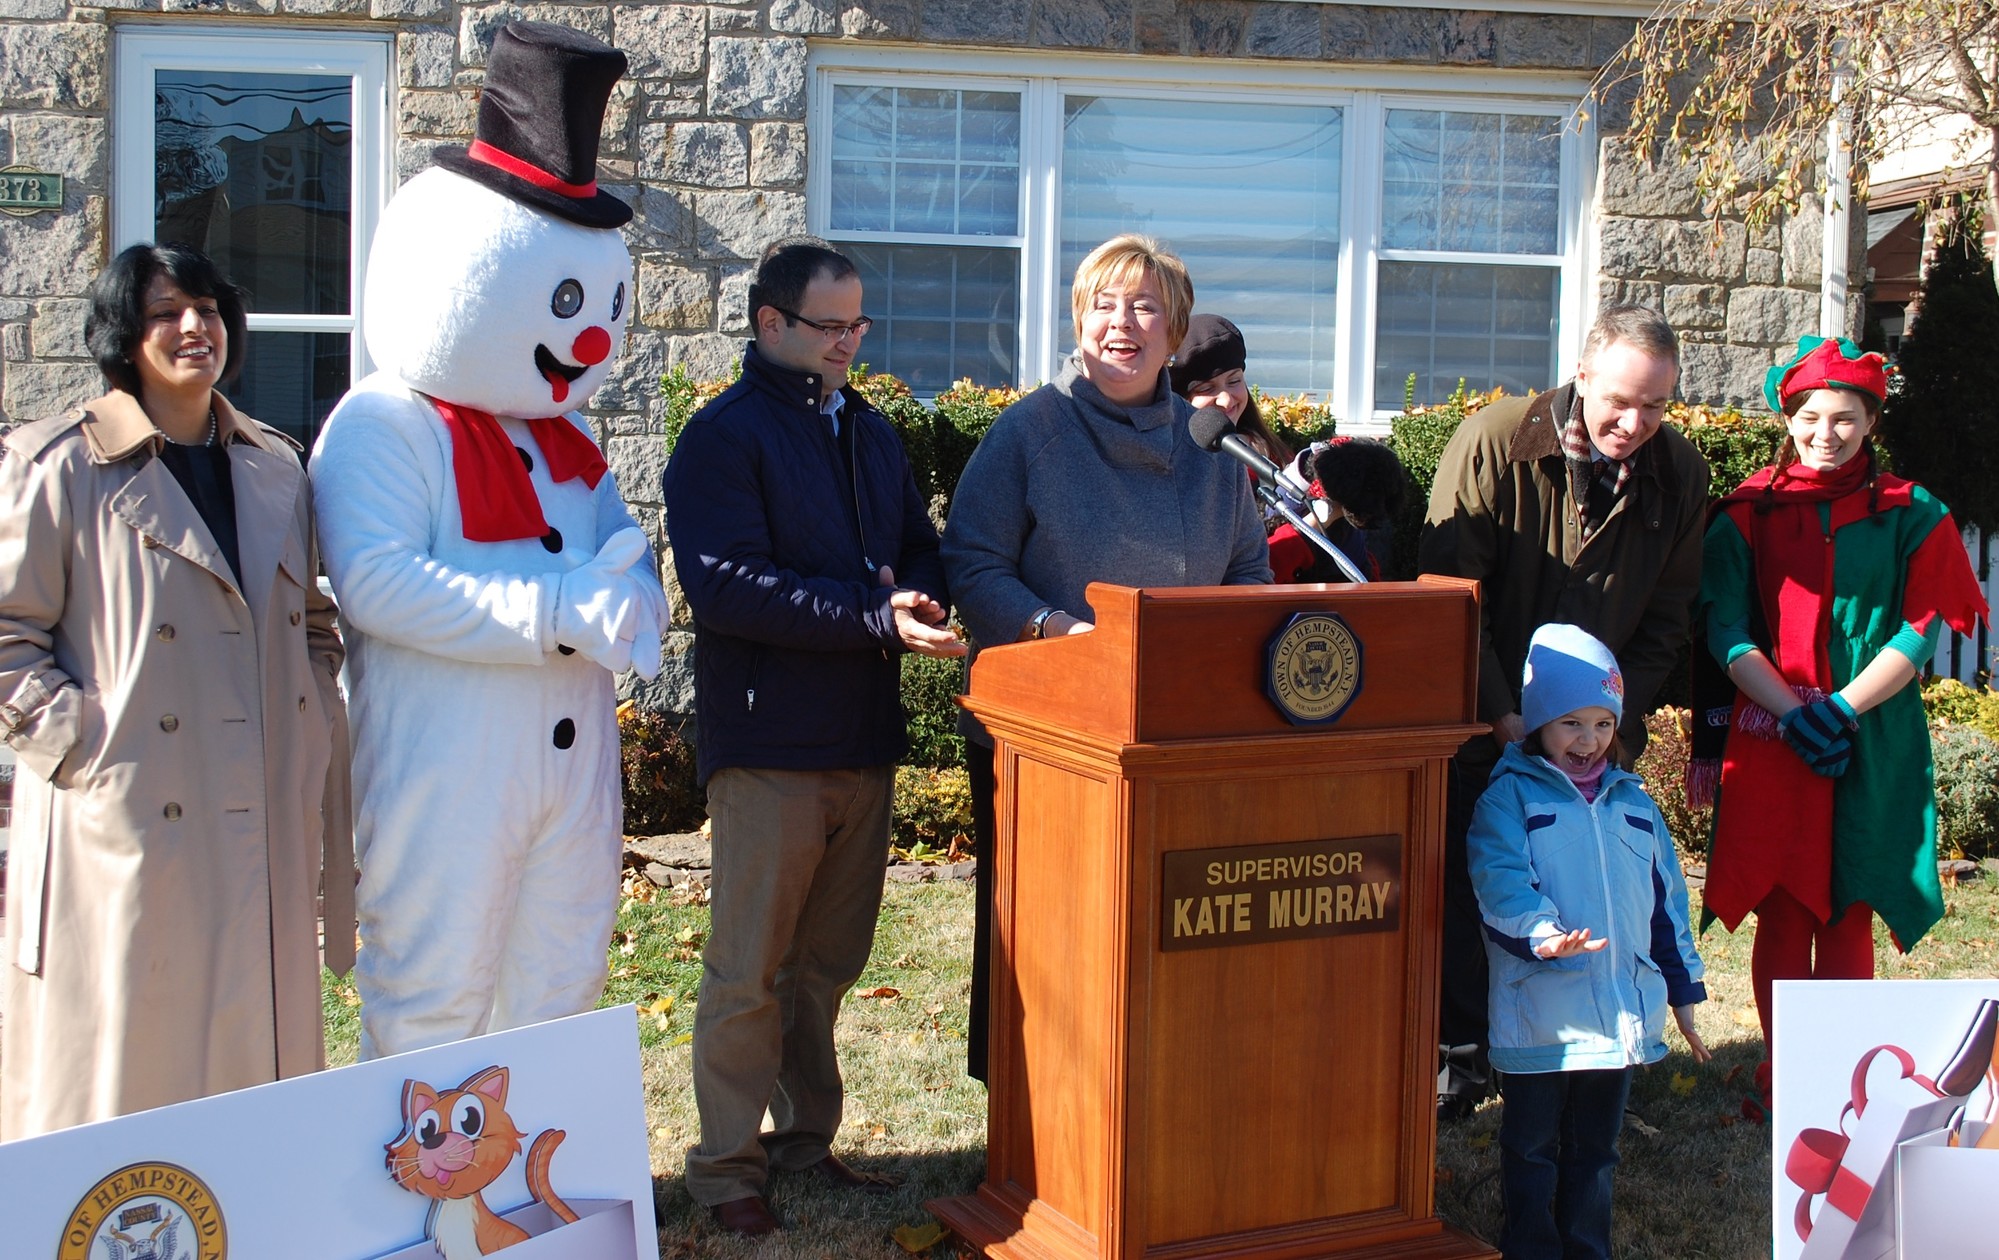 Hempstead Town Supervisor Kate Murray, joined by other town officials and some seasonal characters, announced the start of the Home for the Holidays pet adoption program at the home of Ed and Laura Ra.